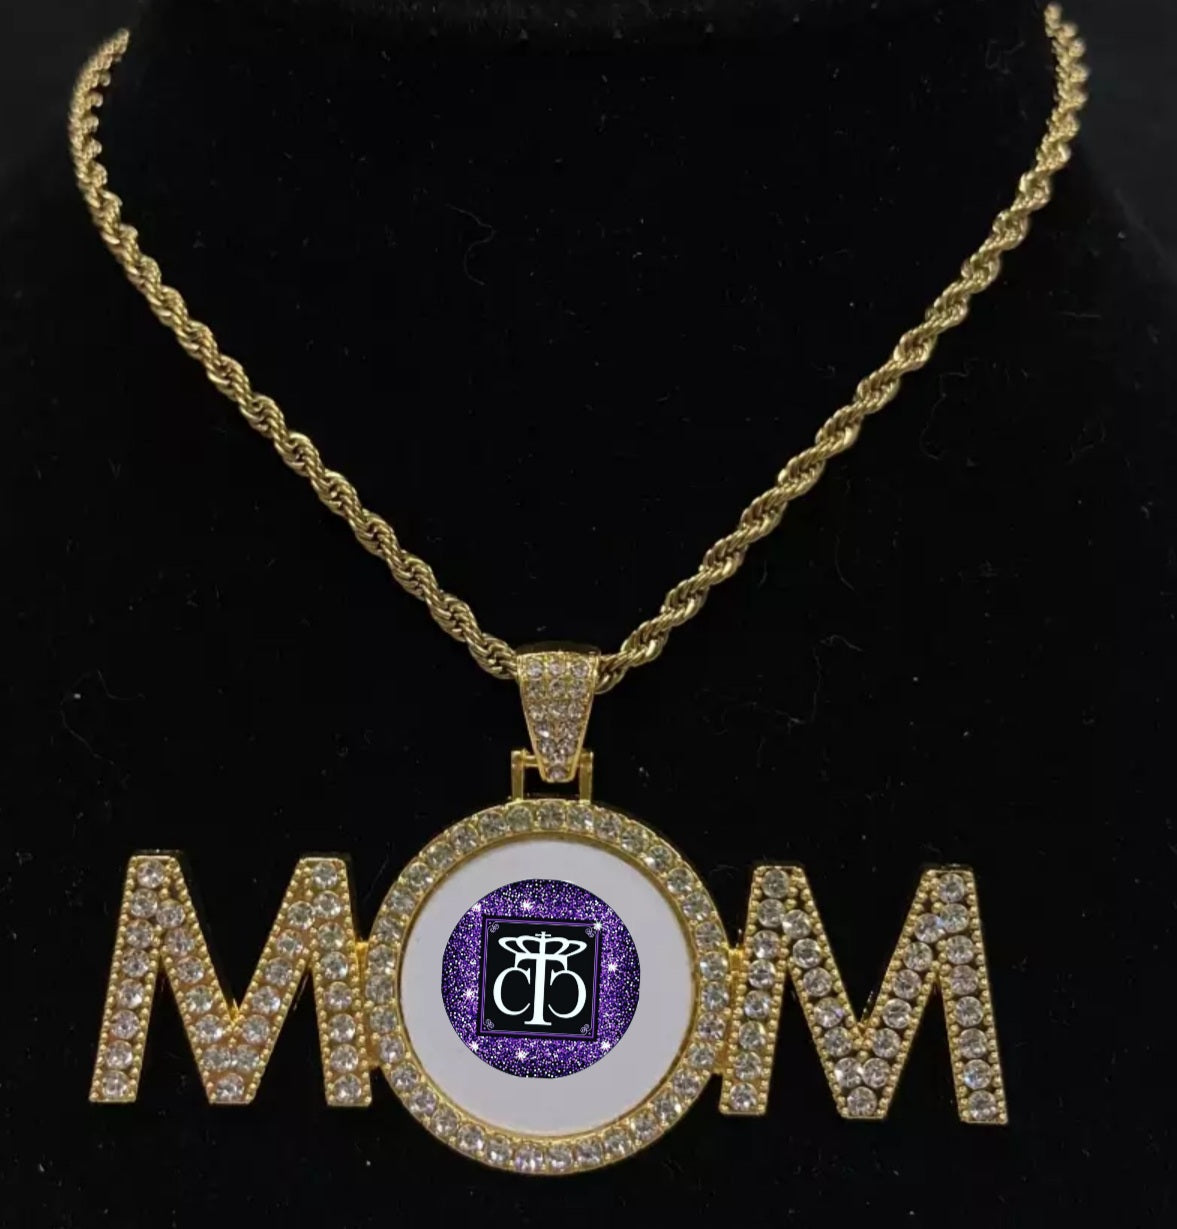 Bling MOM Pendant and Necklace